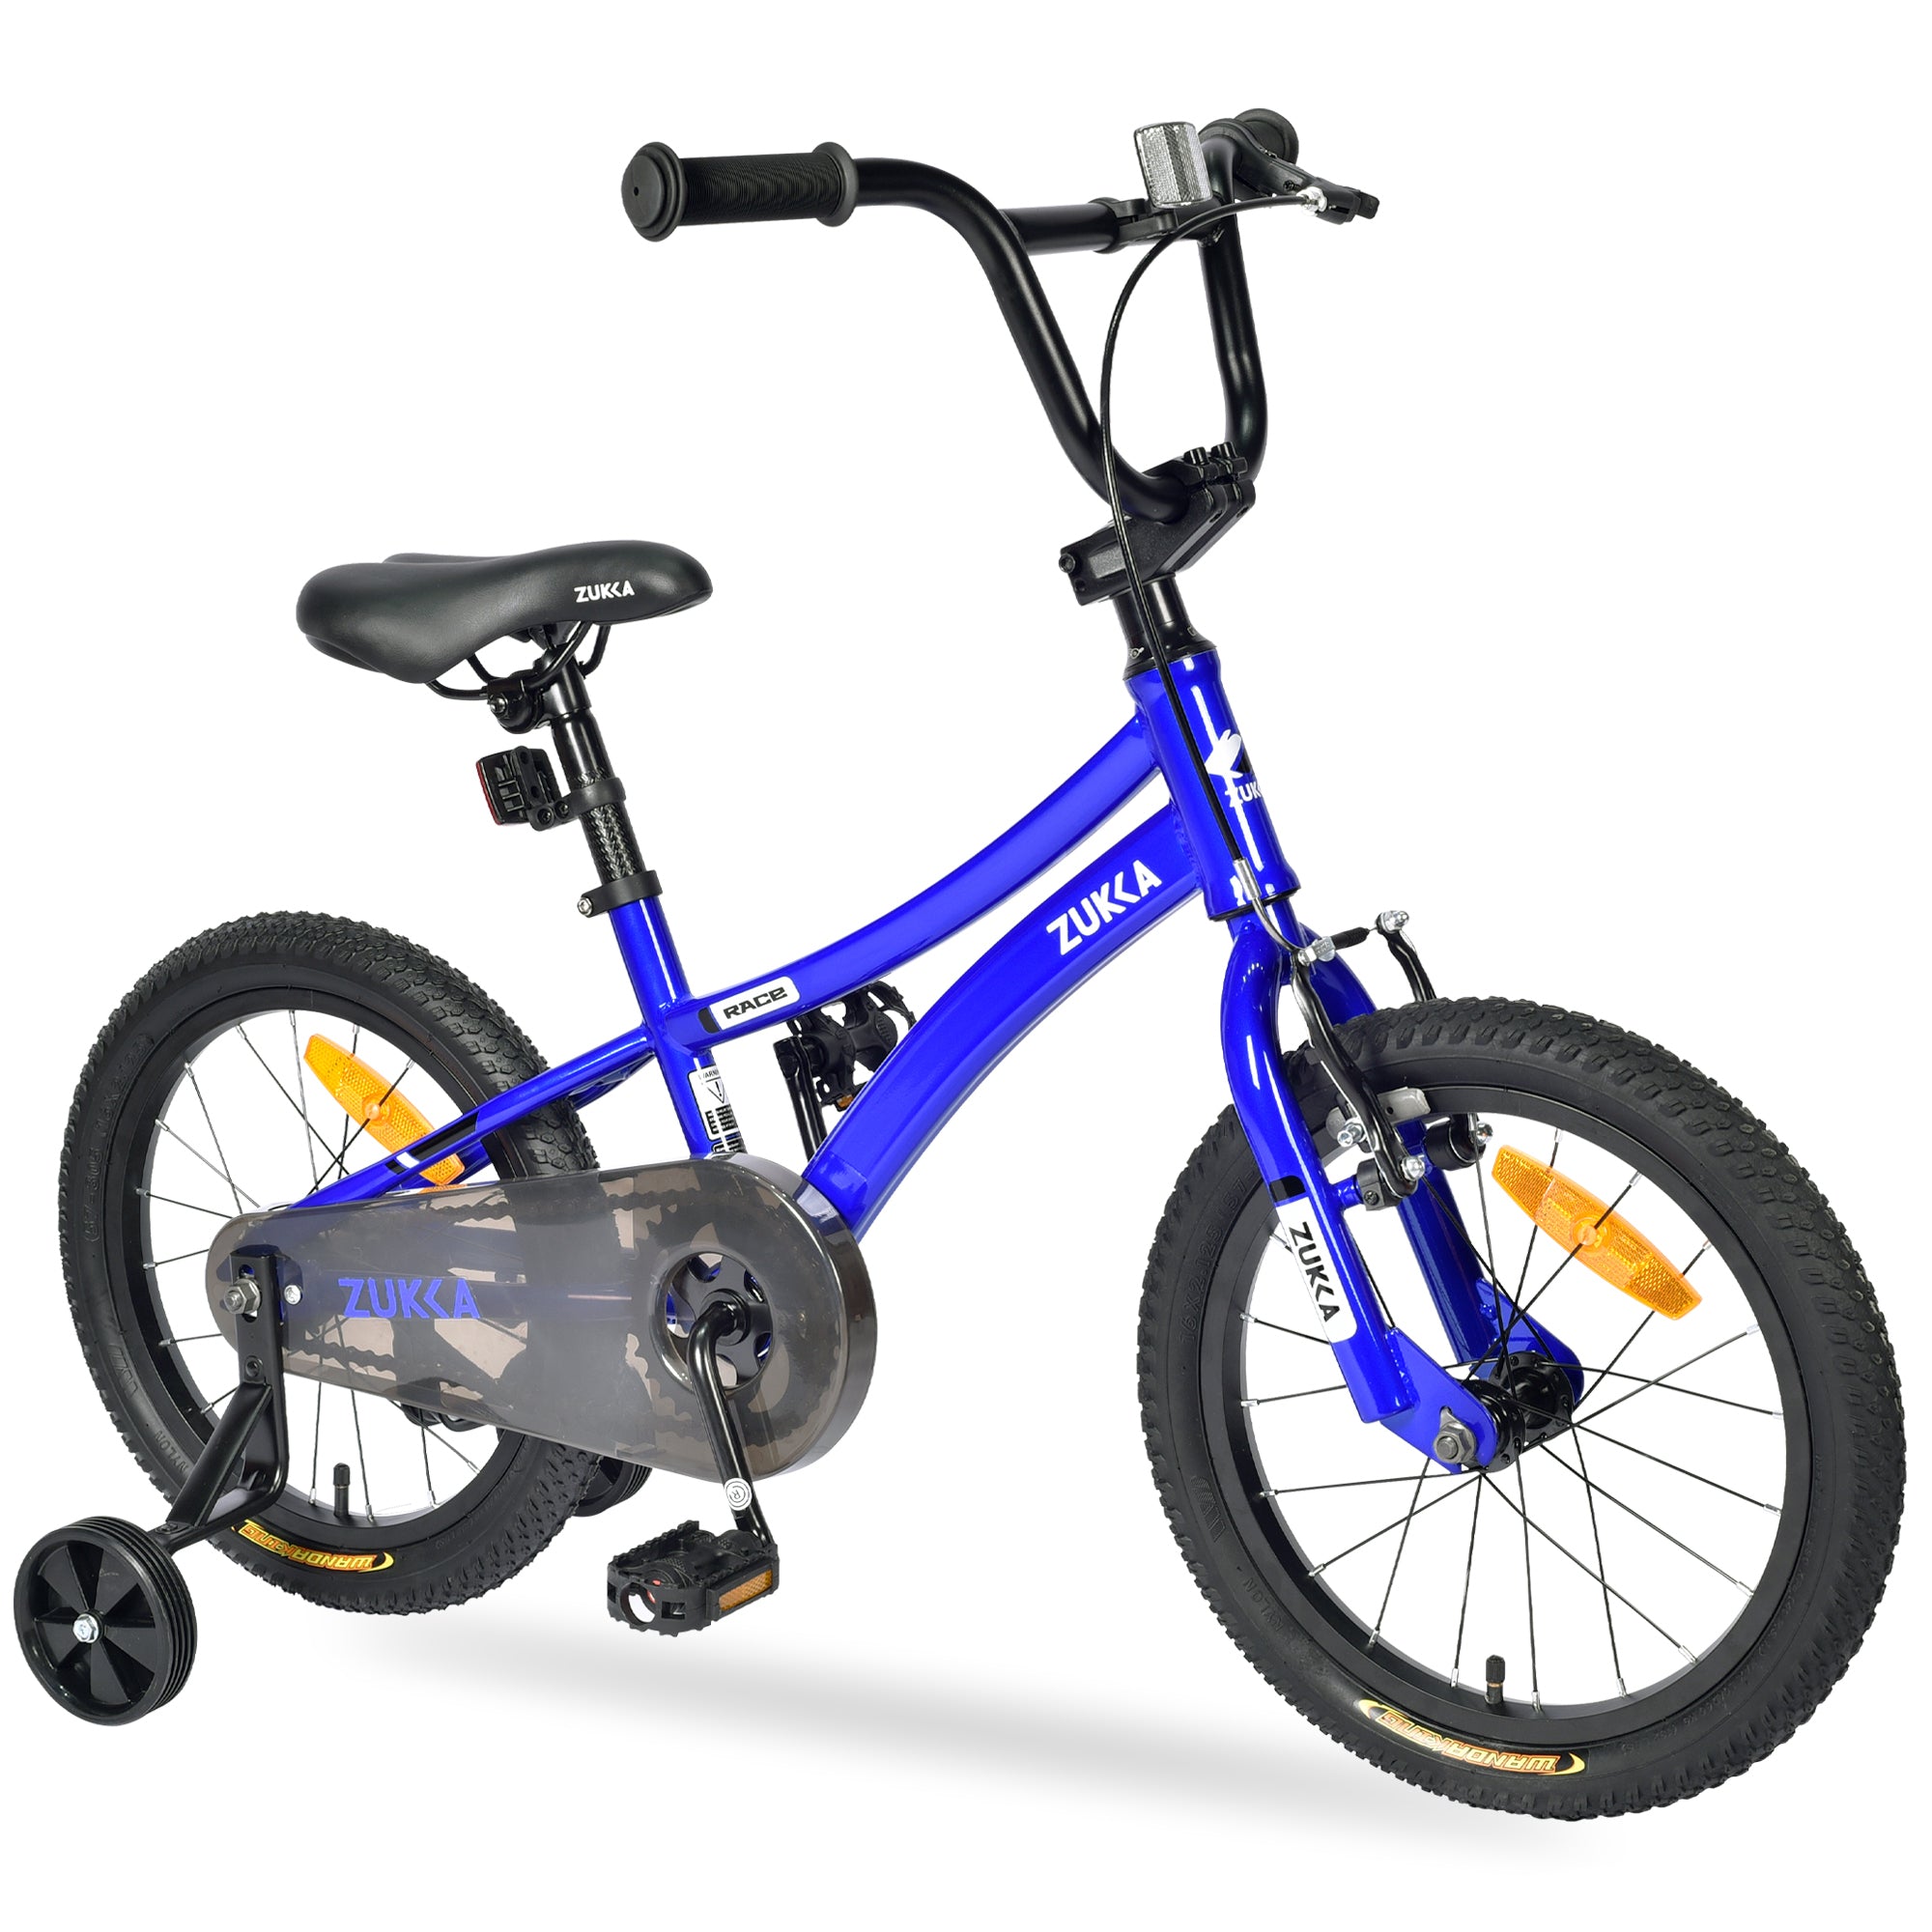 ZUKKA-Kids-Bike,16-Inch-Kids'-Bicycle-with-Training-Wheels-for-Boys-Age-4-7-Years,Multiple-Colors-